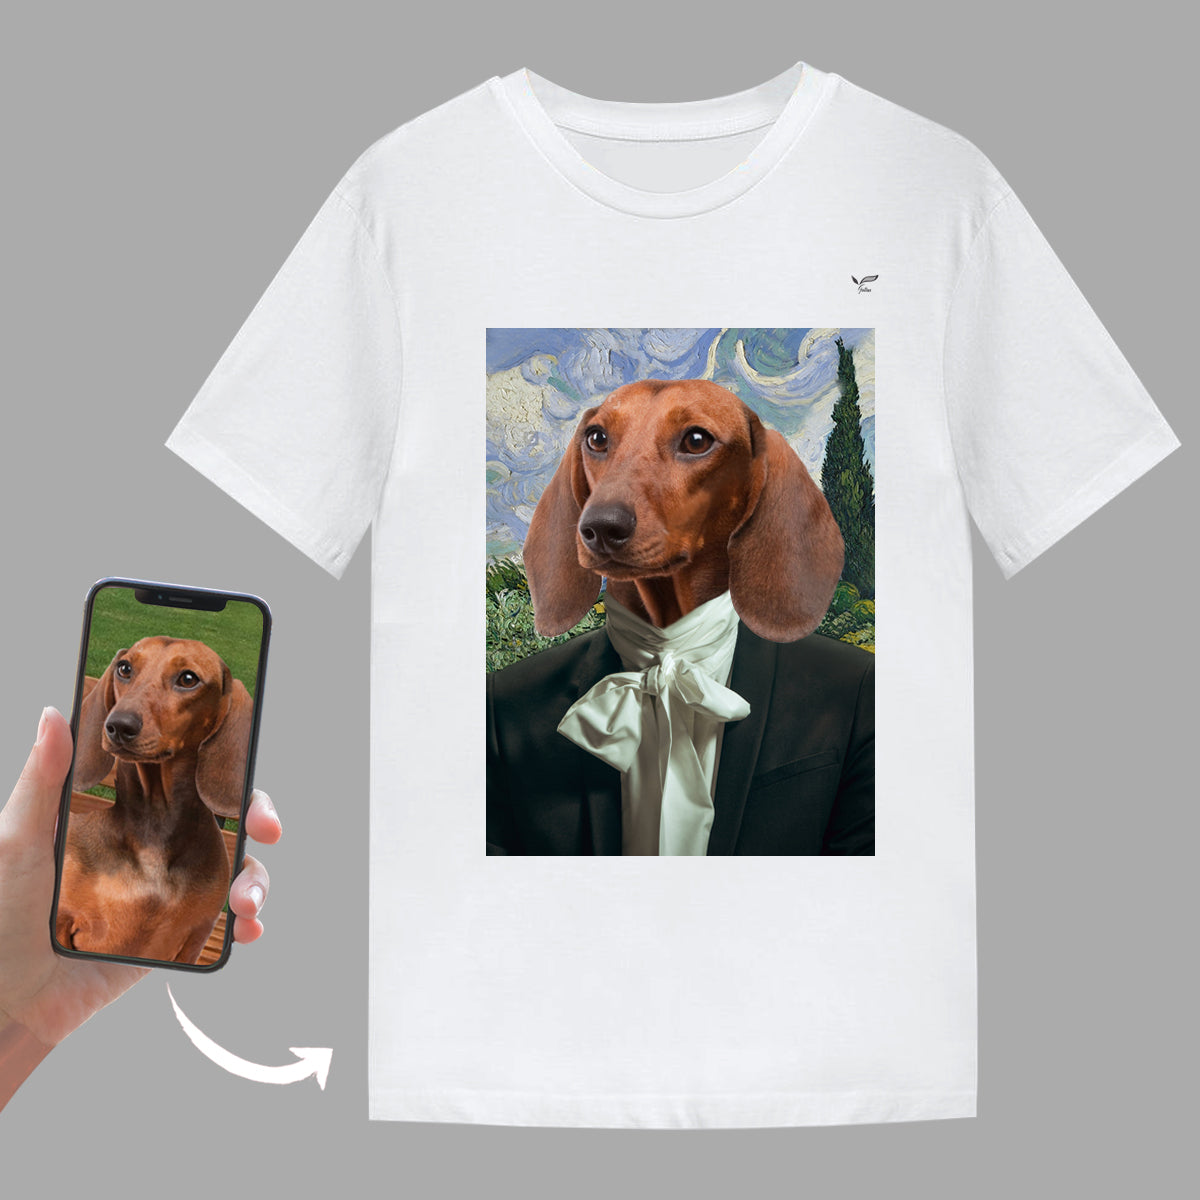 The Ambassador - Personalized T-Shirt With Your Pet's Photo